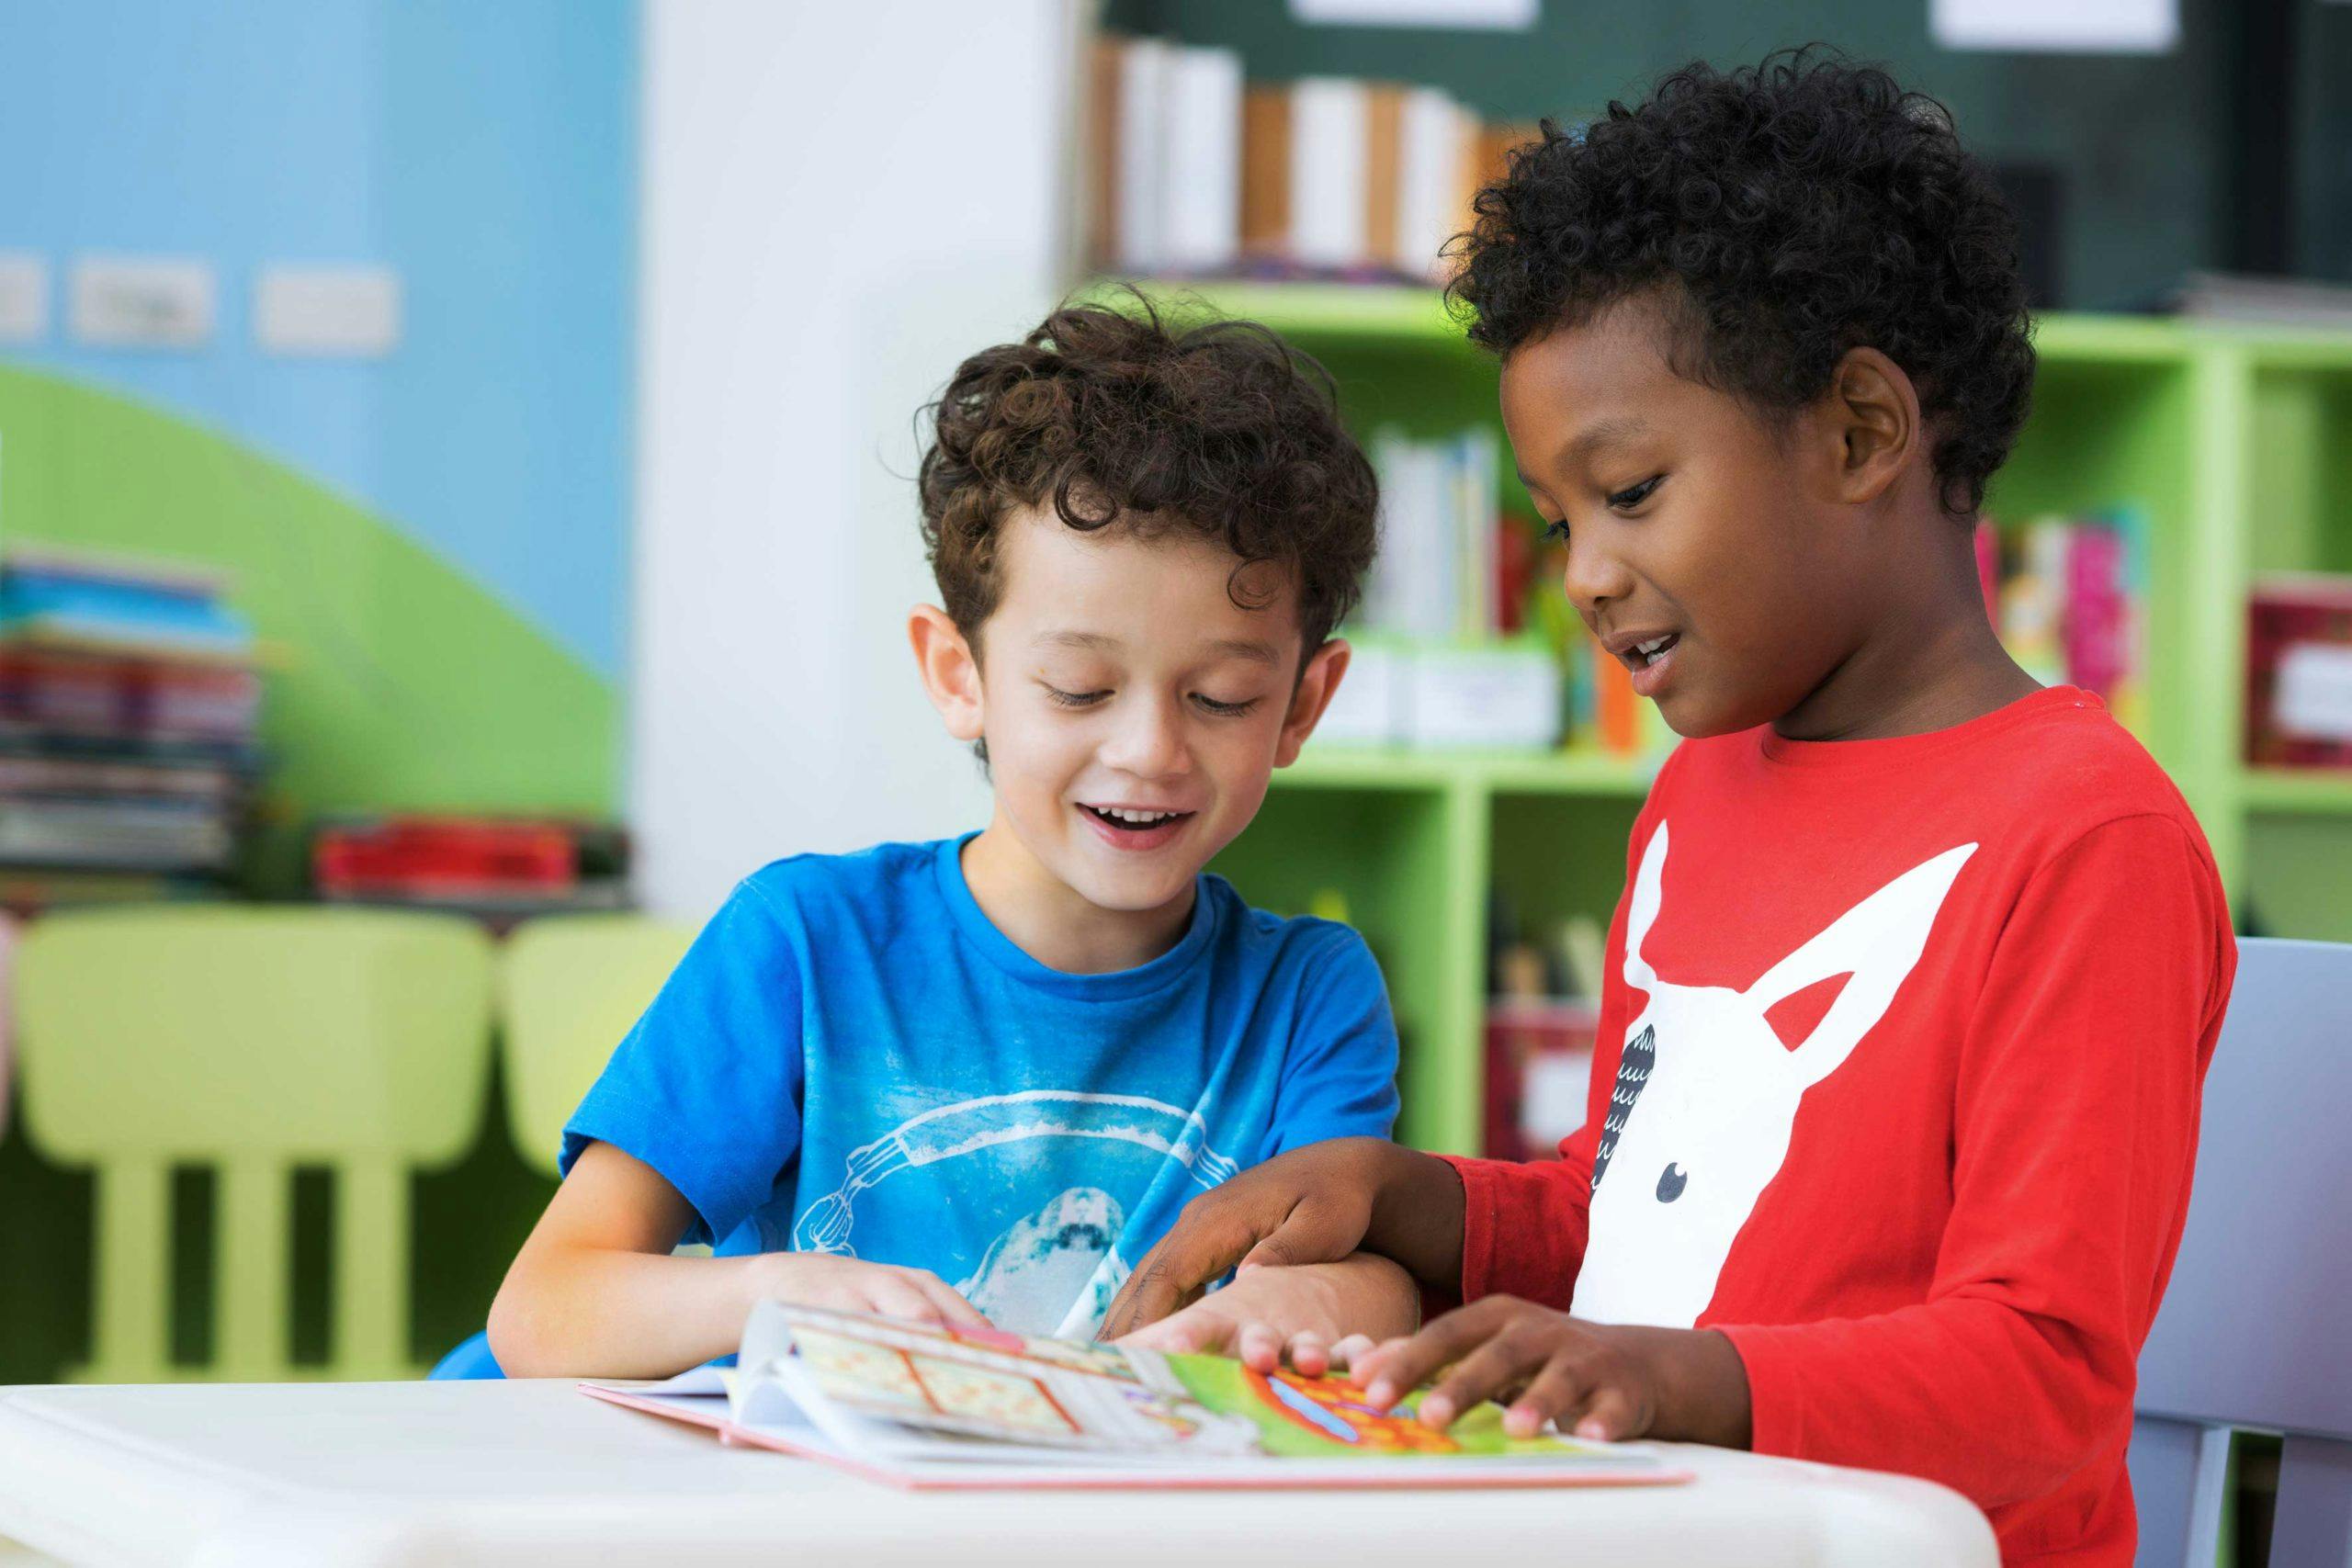 Image of two young children, one white and one black, looking down at a workbook in a classroom.